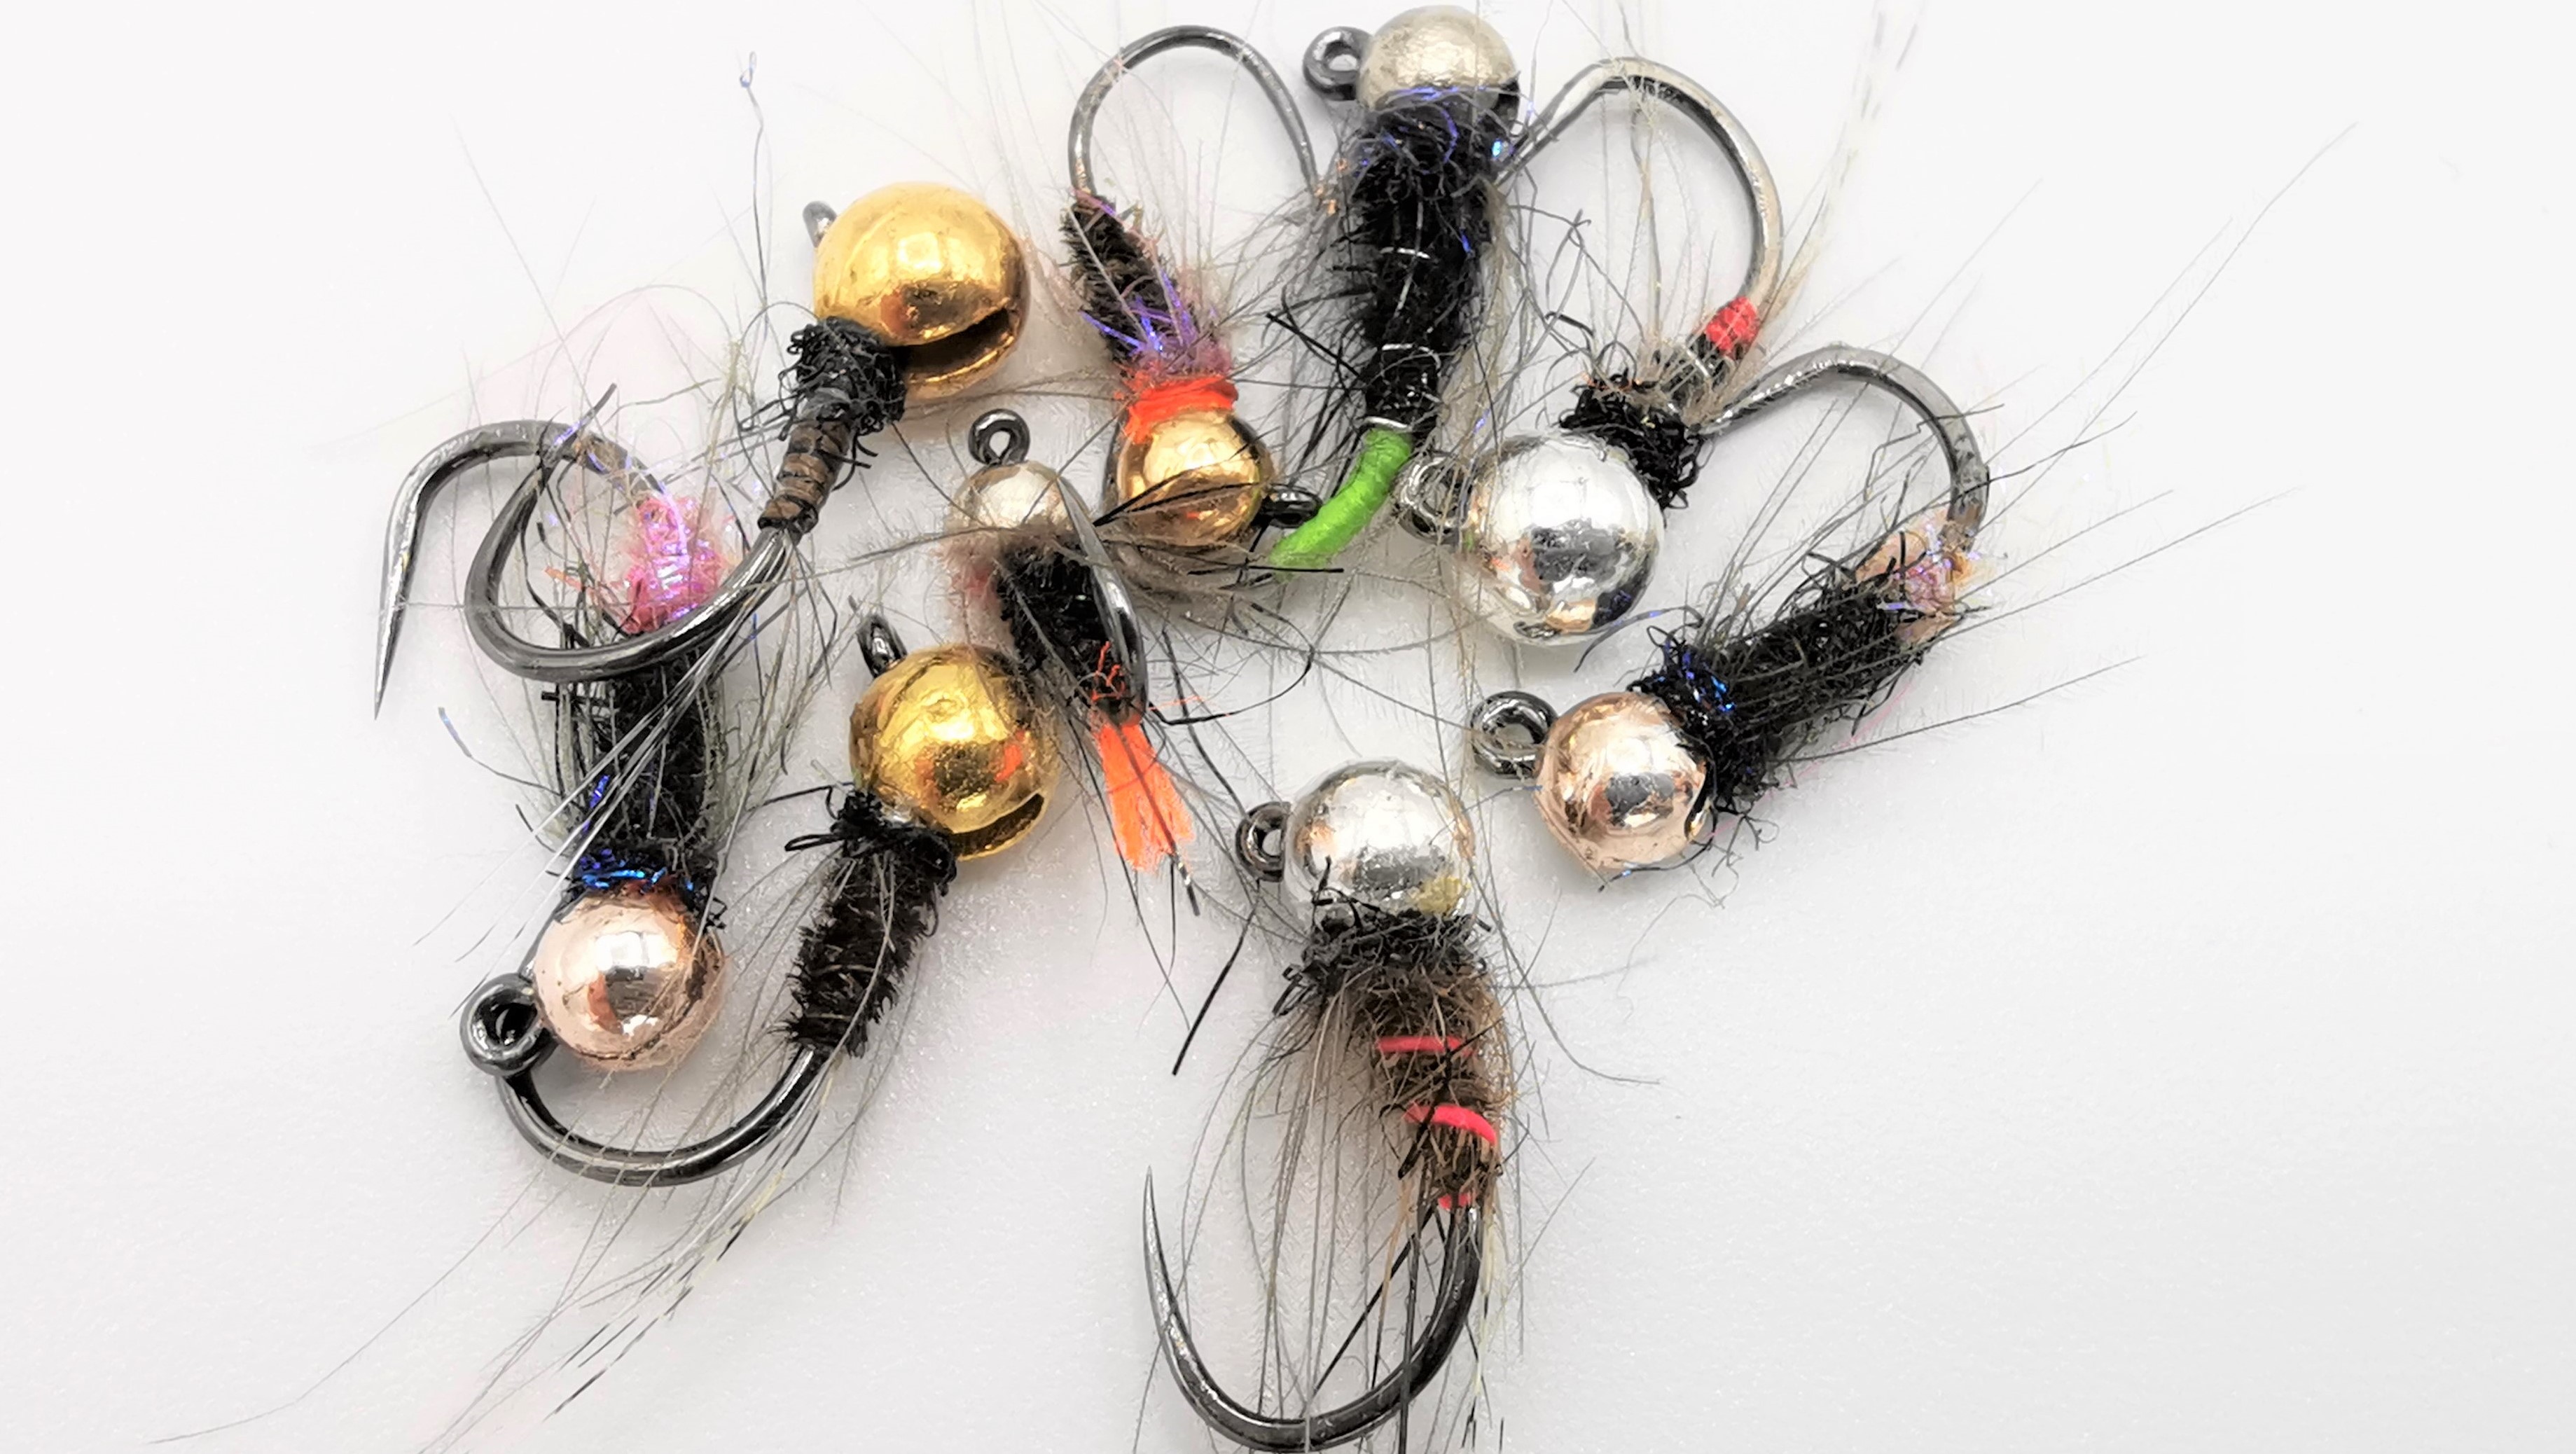  Mavrk Fly Fishing Euro Nymph Competition Barbless Hooks 25  Pack for Fly Tying Black Nickel Coating Strong Durable chemically sharpened  Jig Curve Nymph and Streamer Style : Sports & Outdoors